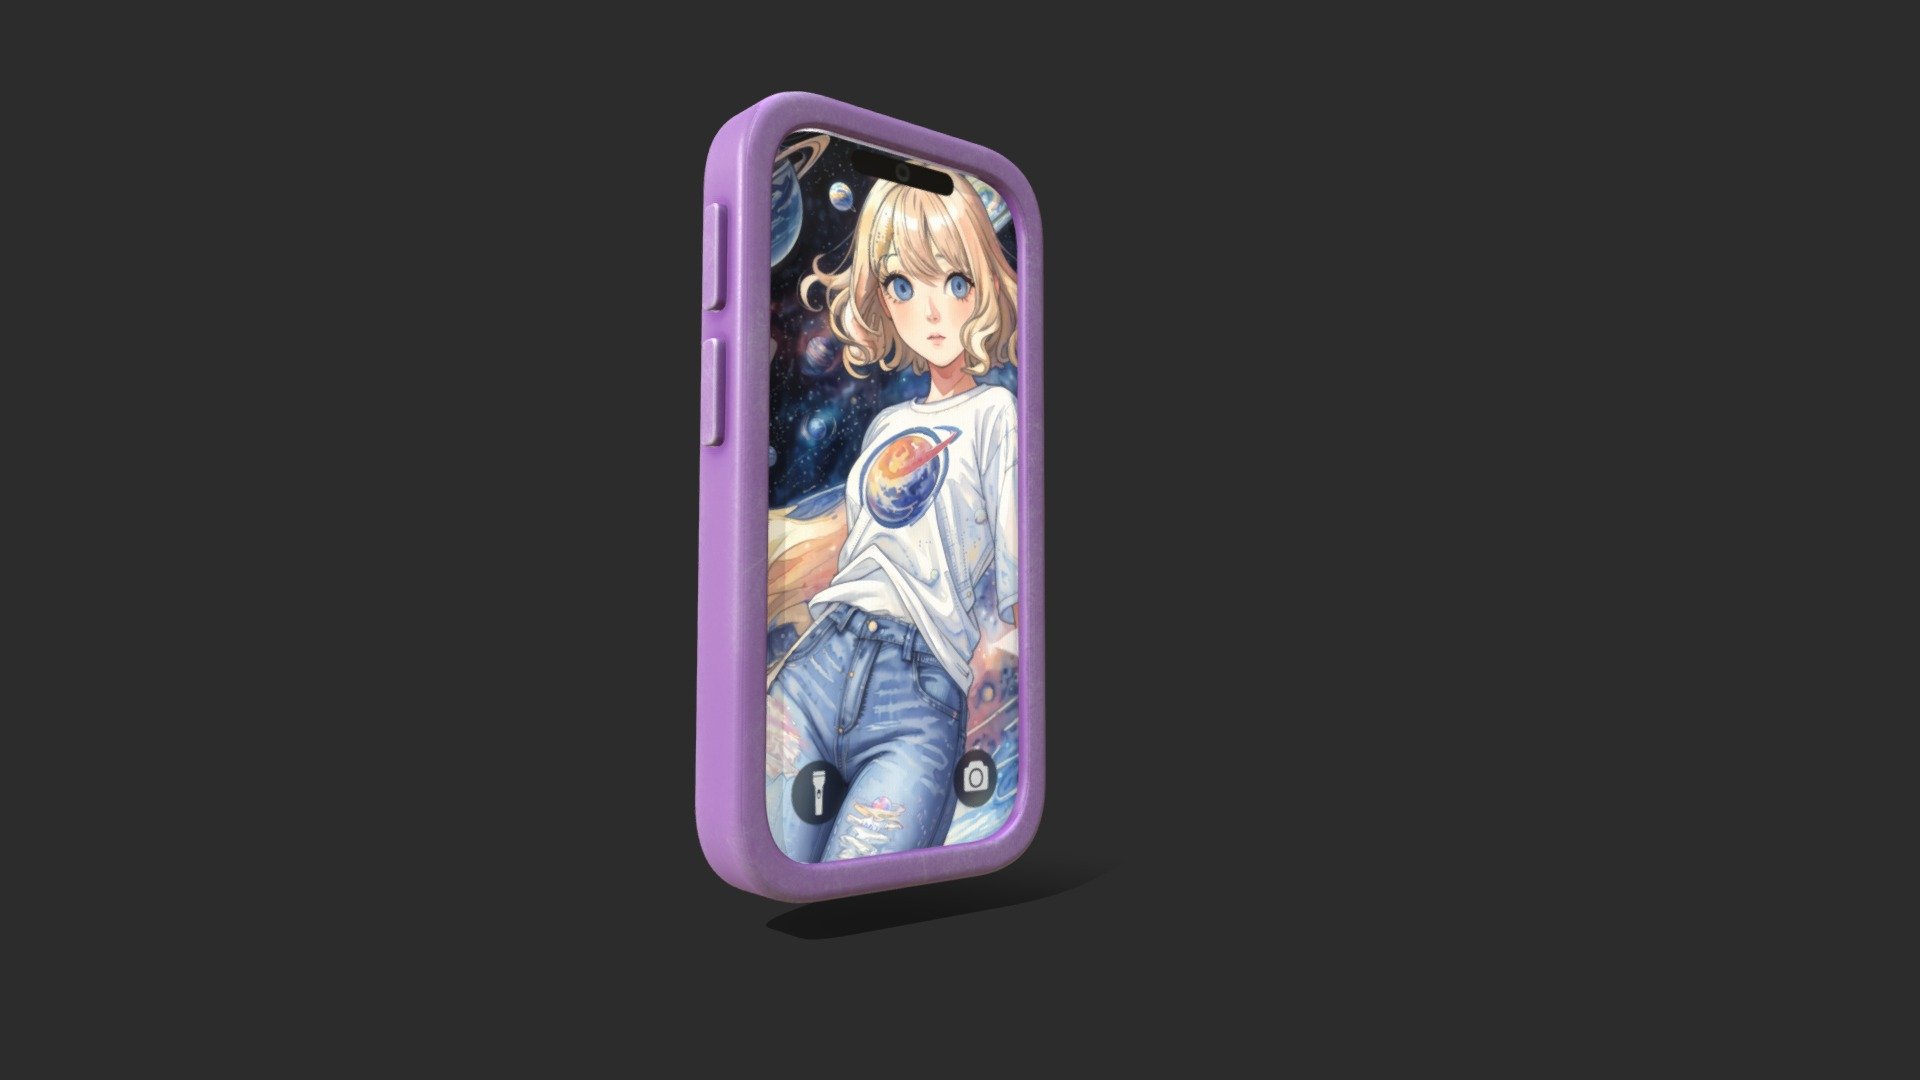 Cute cellphone with pulple case, Toon style, mid poly level, no branded.
-2 materials body/screen. 4K both textures, (PBR Roughness metallic) Ready for Realtime or Video production. Enjoy it! - Cute Cellphone - 3D model by omarelone 3d model